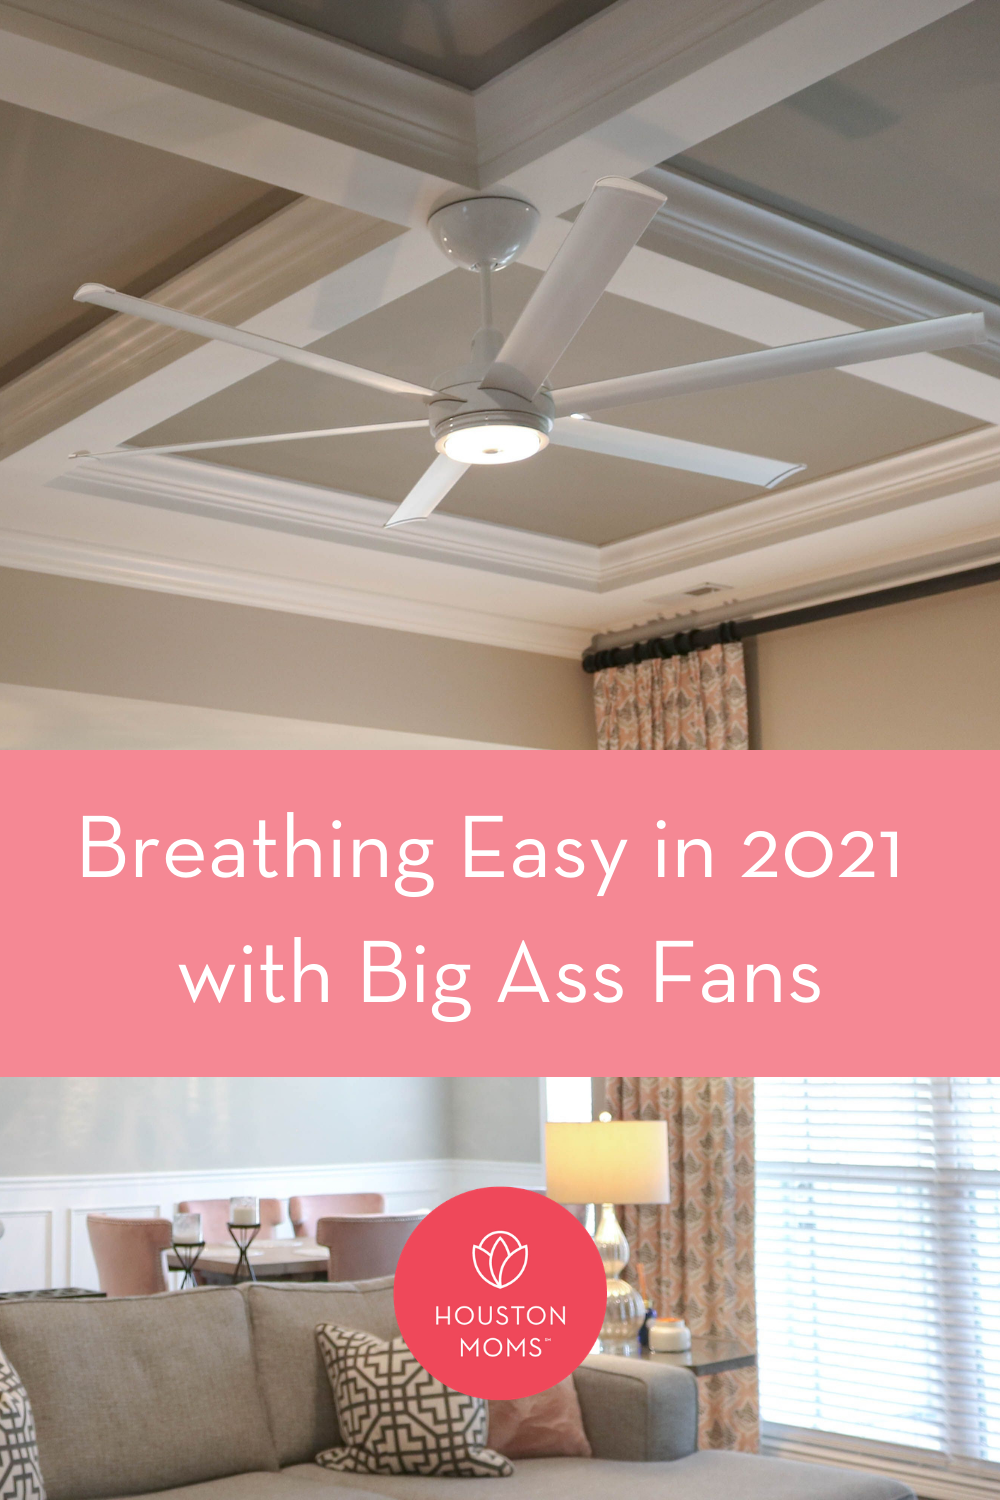 Houston Moms "Breathing Easy in 2021 with Big Ass Fans" #houstonmoms #houstonmomsblog #momsaroundhouston